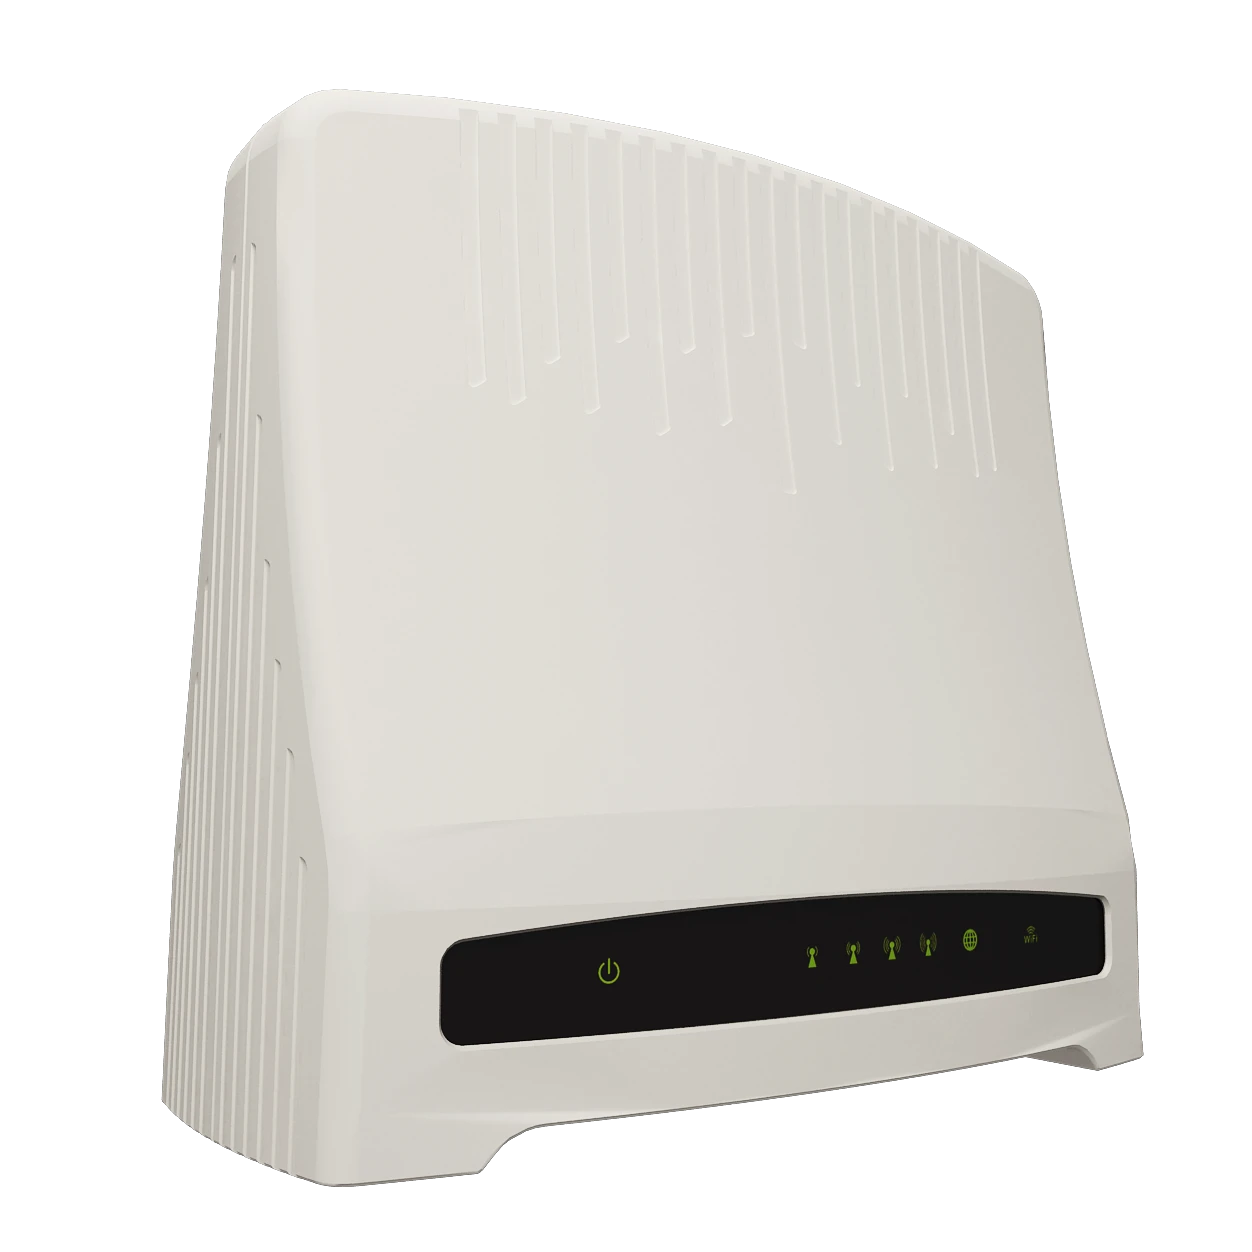 Hot Selling  Wireless Router Speed 600Mbps Wireless Transmission Rate White Gigabytes  Router